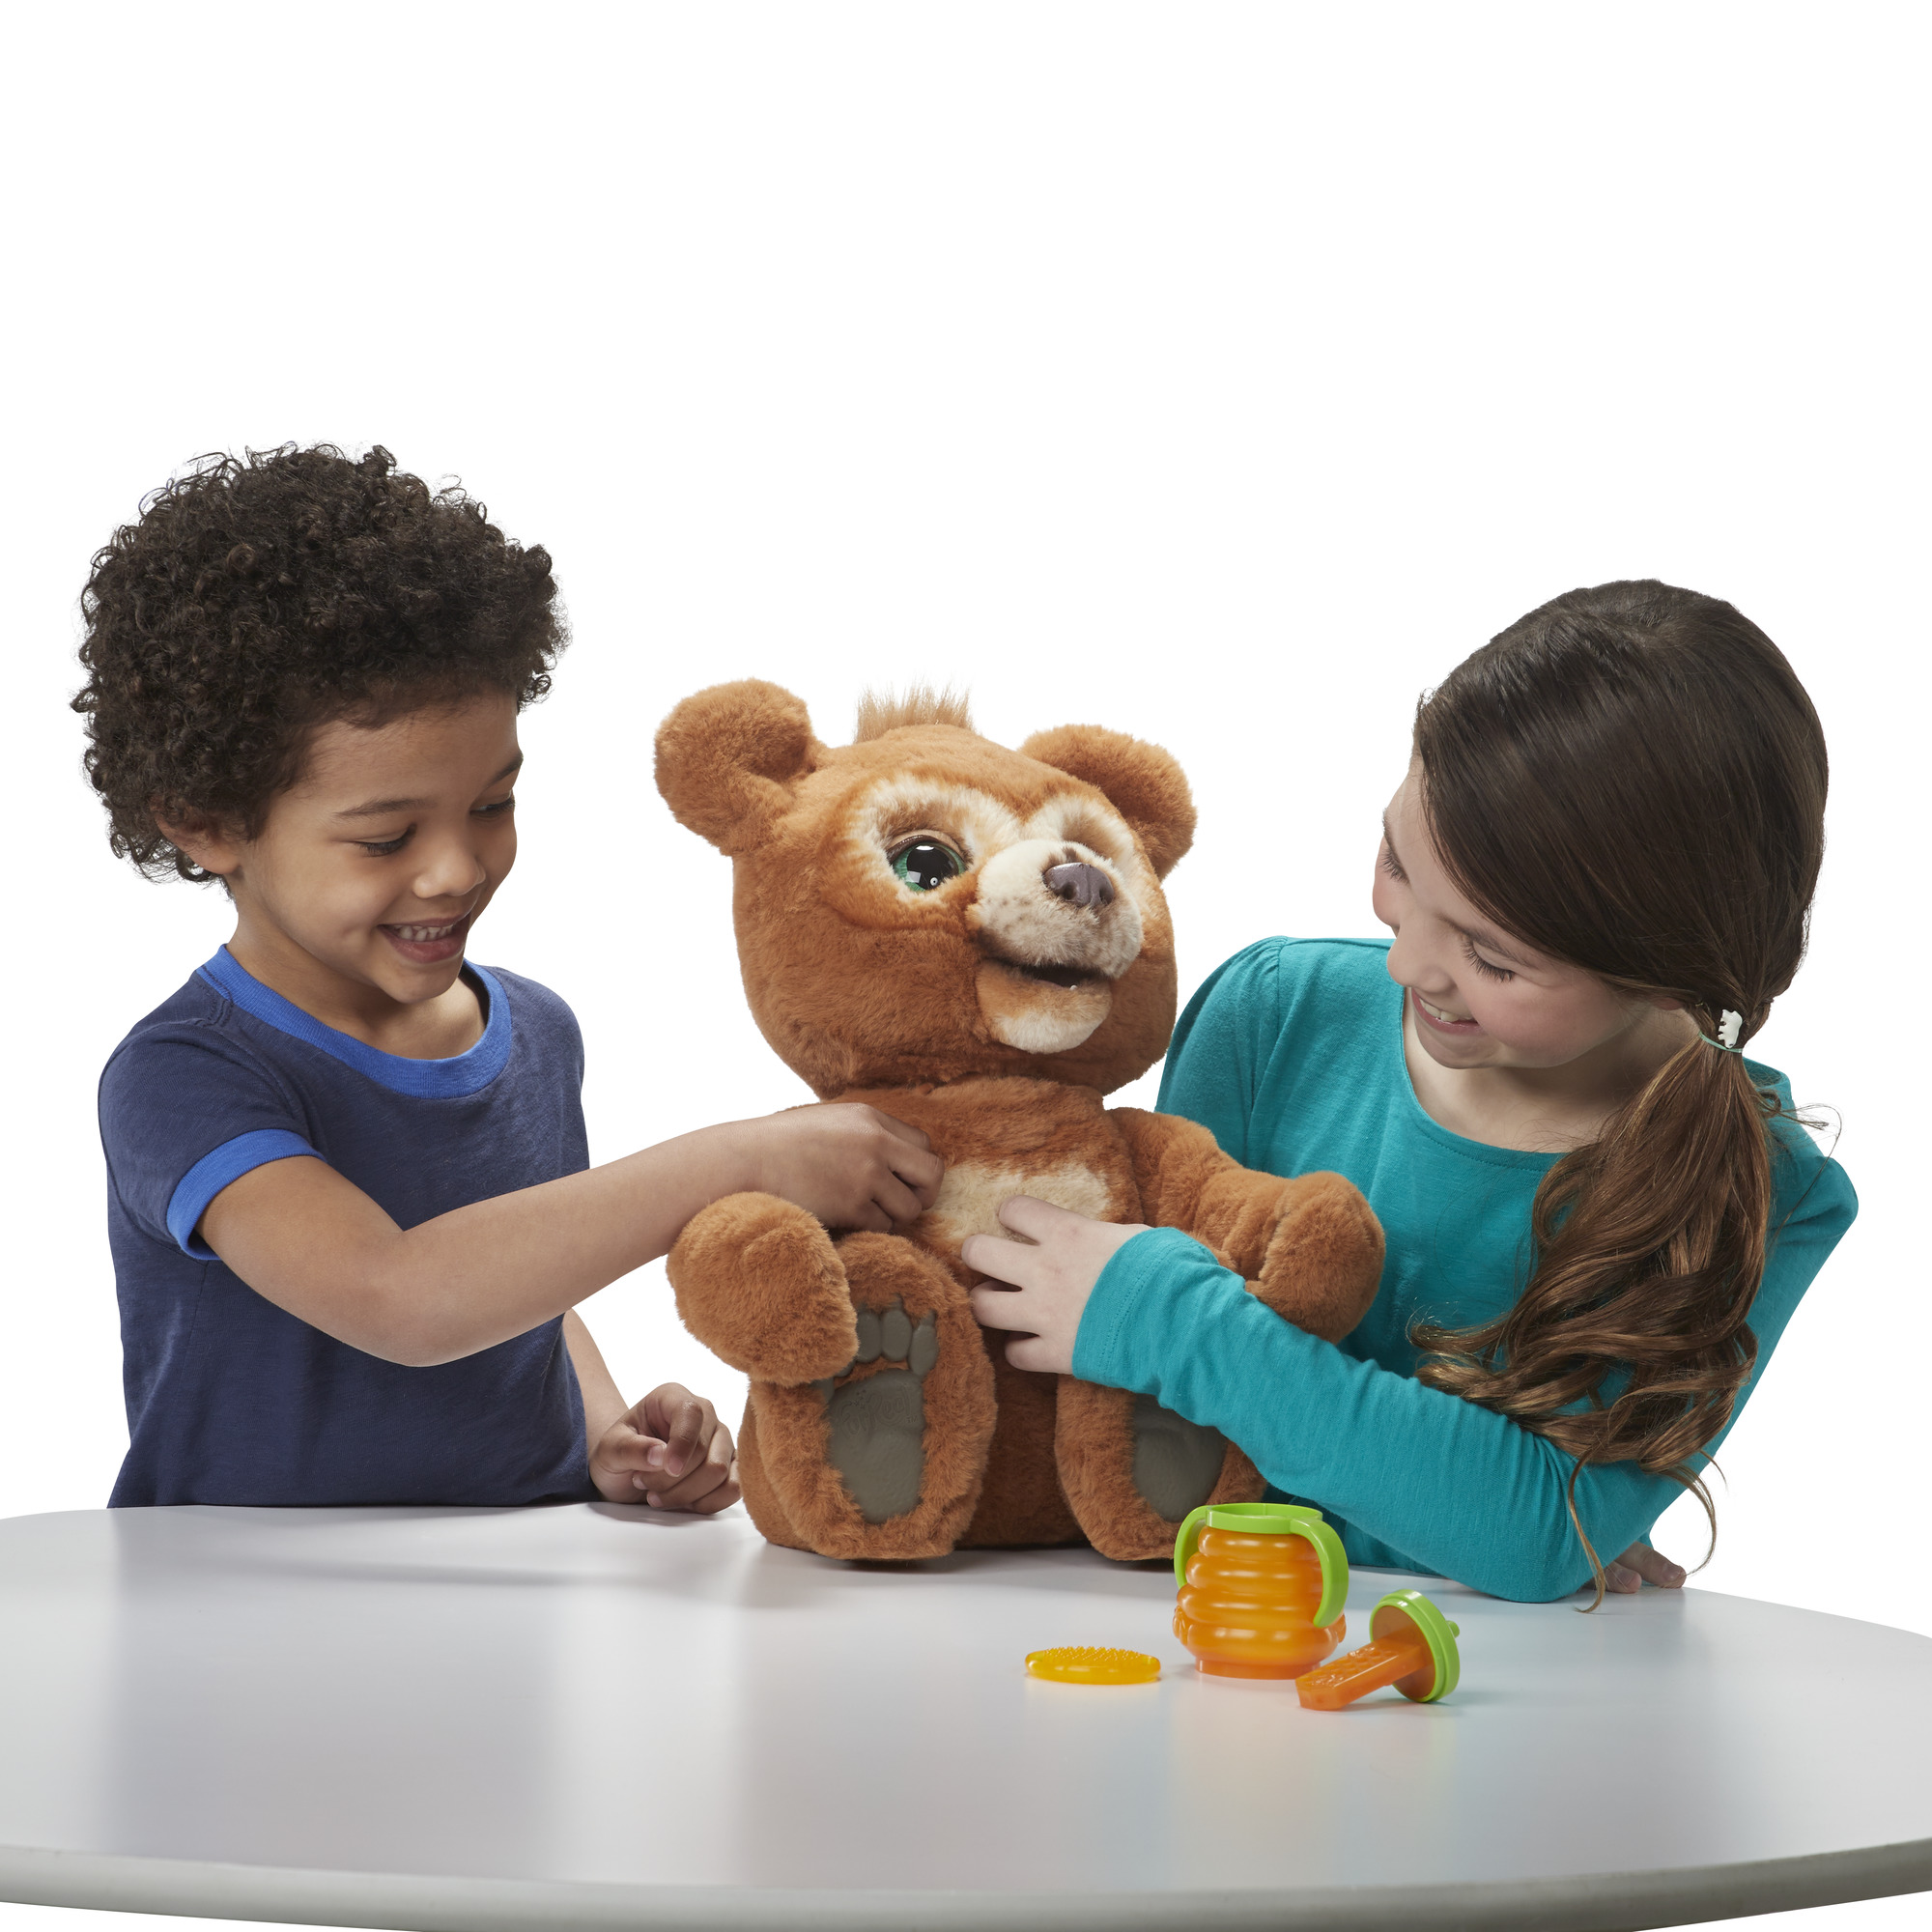 furreal cubby the curious bear interactive plush toy